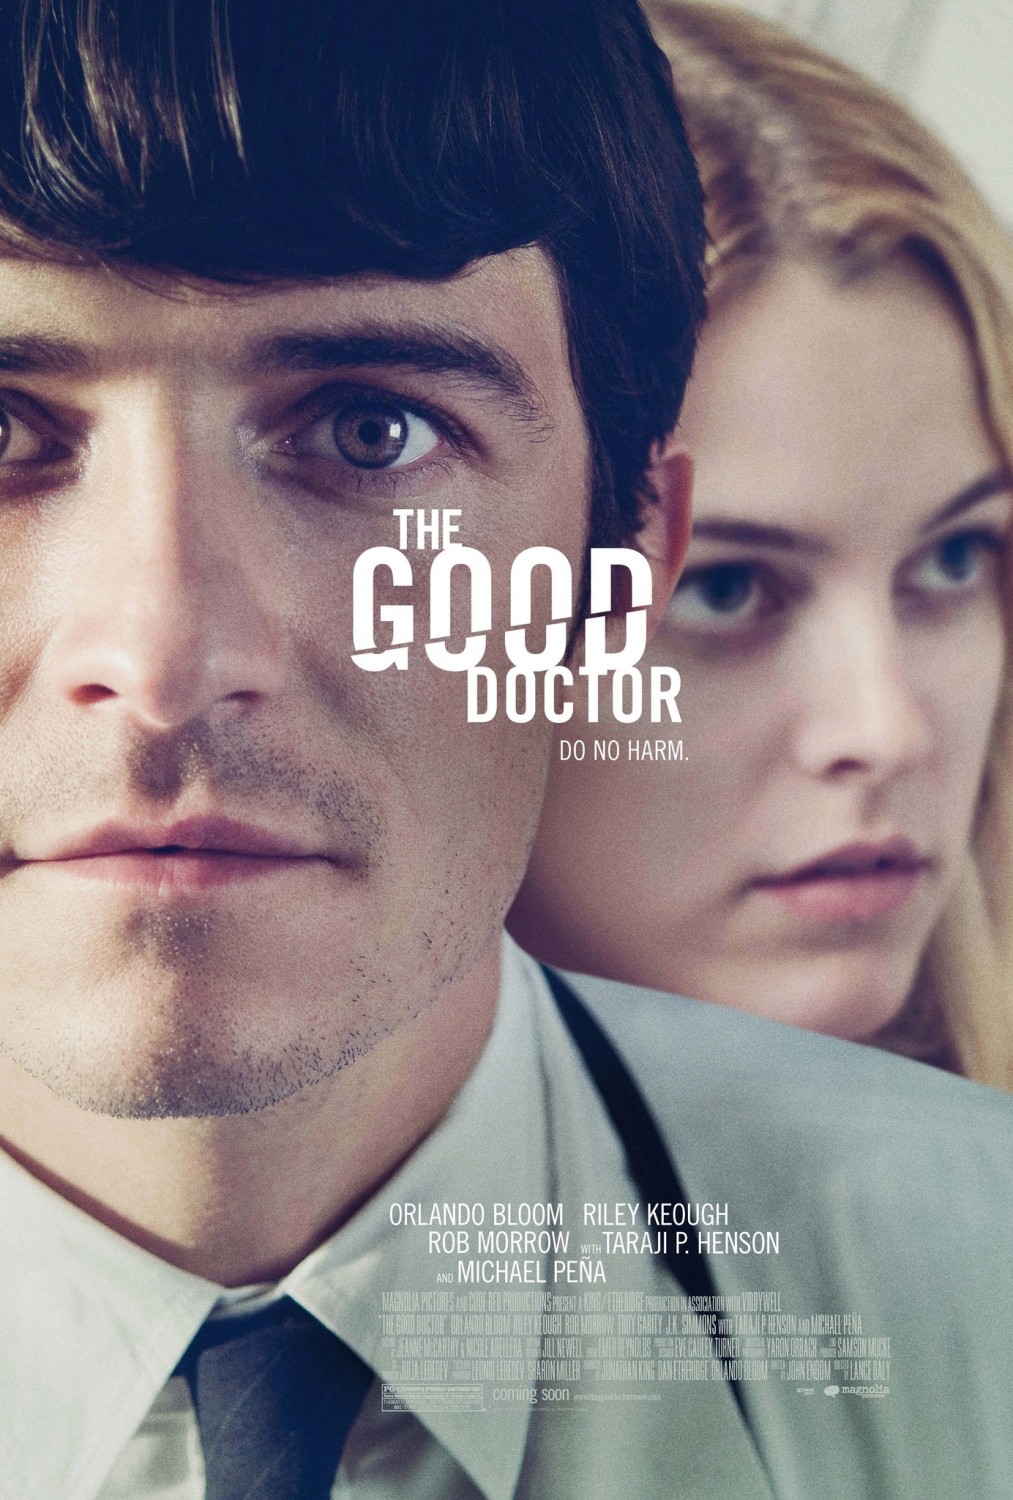 The Good Doctor movie